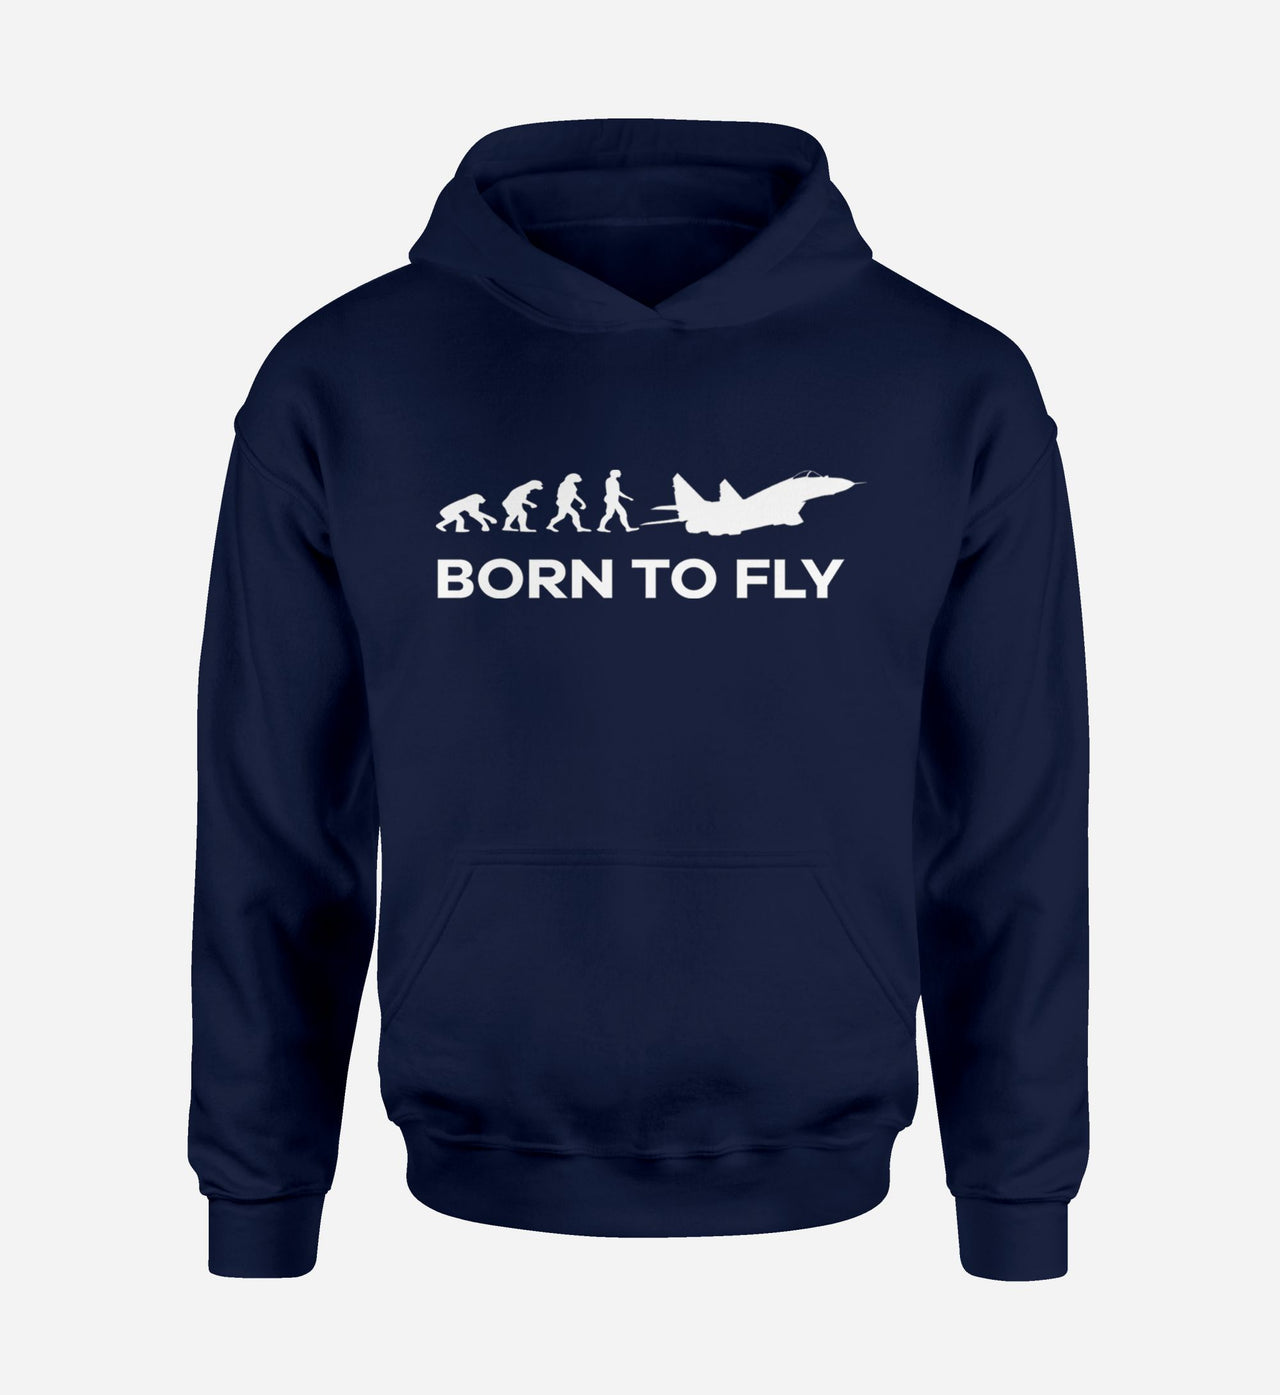 Born To Fly Military Designed Hoodies